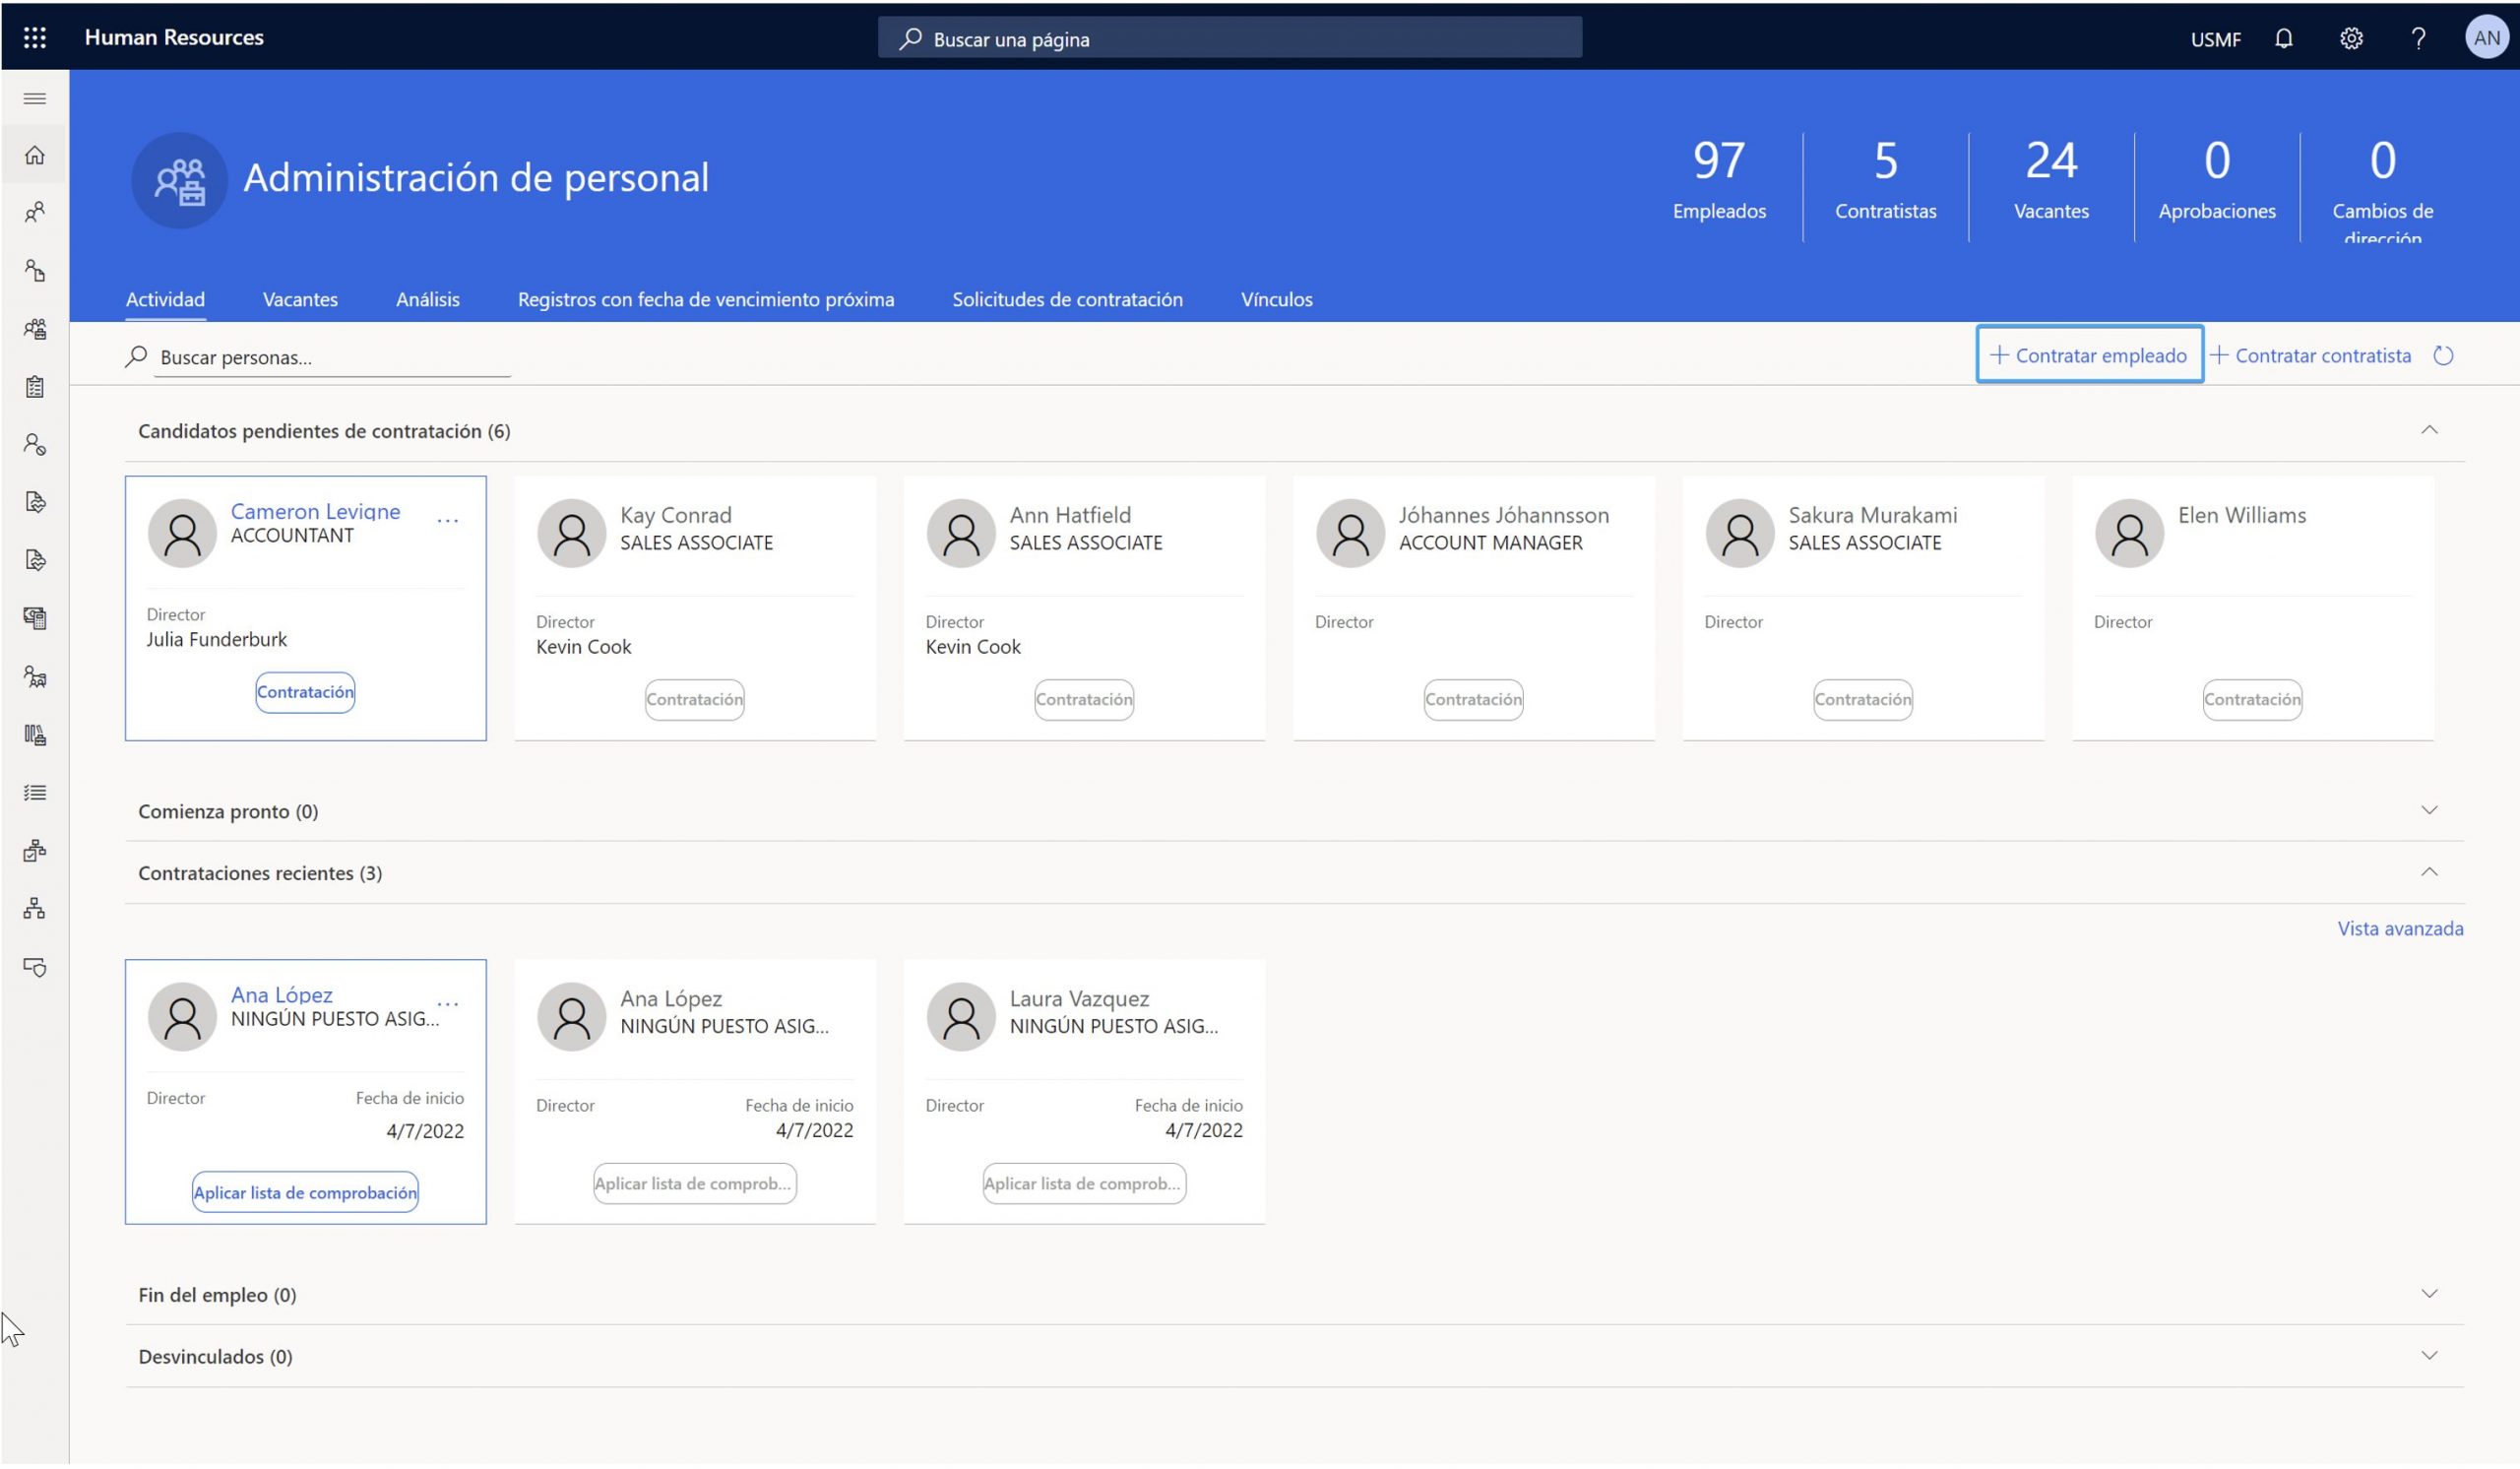 Checklists in Dynamics 365 Human Resources Axazure